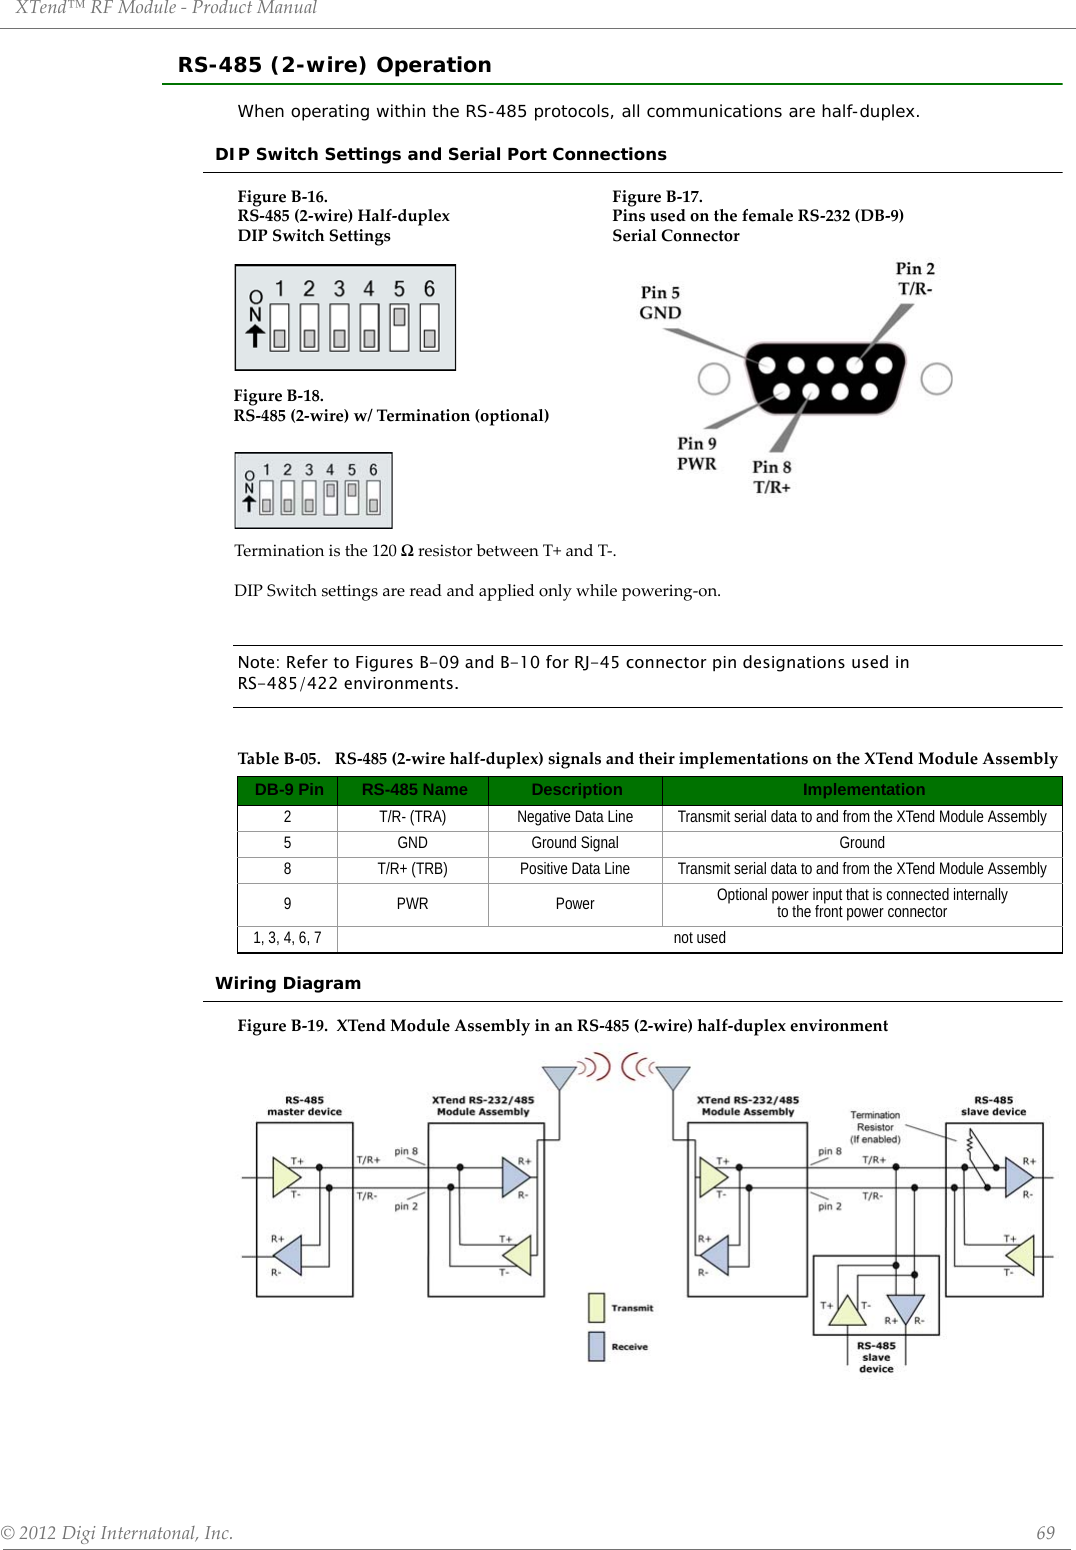 XTend™ RF Module - Product Manual © 2012 Digi Internatonal, Inc.      69RS-485 (2-wire) OperationWhen operating within the RS-485 protocols, all communications are half-duplex.DIP Switch Settings and Serial Port ConnectionsFigure B-16. Figure B-17. RS-485 (2-wire) Half-duplex  Pins used on the female RS-232 (DB-9)  DIP Switch Settings Serial Connector Note: Refer to Figures B-09 and B-10 for RJ-45 connector pin designations used in  RS-485/422 environments.Wiring DiagramFigure B-19.  XTend Module Assembly in an RS-485 (2-wire) half-duplex environmentTable B-05. RS-485 (2-wire half-duplex) signals and their implementations on the XTend Module AssemblyDB-9 Pin RS-485 Name Description Implementation2 T/R- (TRA) Negative Data Line Transmit serial data to and from the XTend Module Assembly5 GND Ground Signal Ground8 T/R+ (TRB) Positive Data Line Transmit serial data to and from the XTend Module Assembly9PWR Power Optional power input that is connected internally to the front power connector1, 3, 4, 6, 7 not usedFigure B-18. RS-485 (2-wire) w/ Termination (optional)Termination is the 120 Ω resistor between T+ and T-.  DIP Switch settings are read and applied only while powering-on.